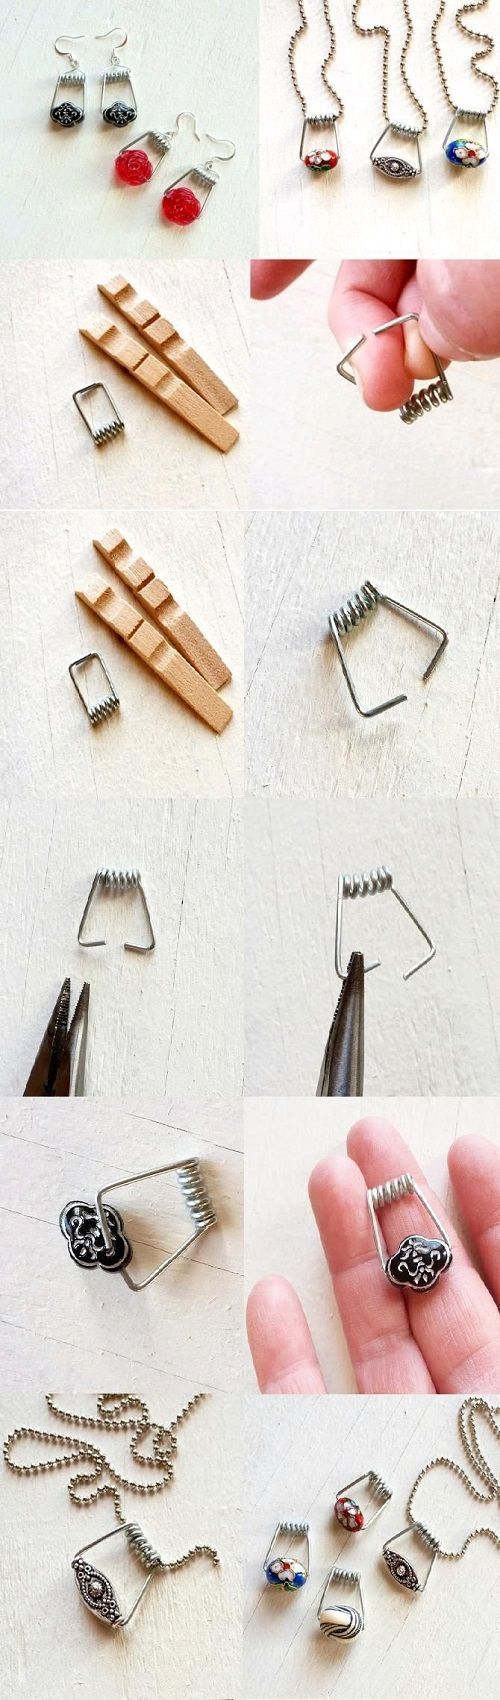 13 Easy DIY Ideas with Clothespins | Design & DIY Magazine. Love this for my old charm necklaces that are broken!